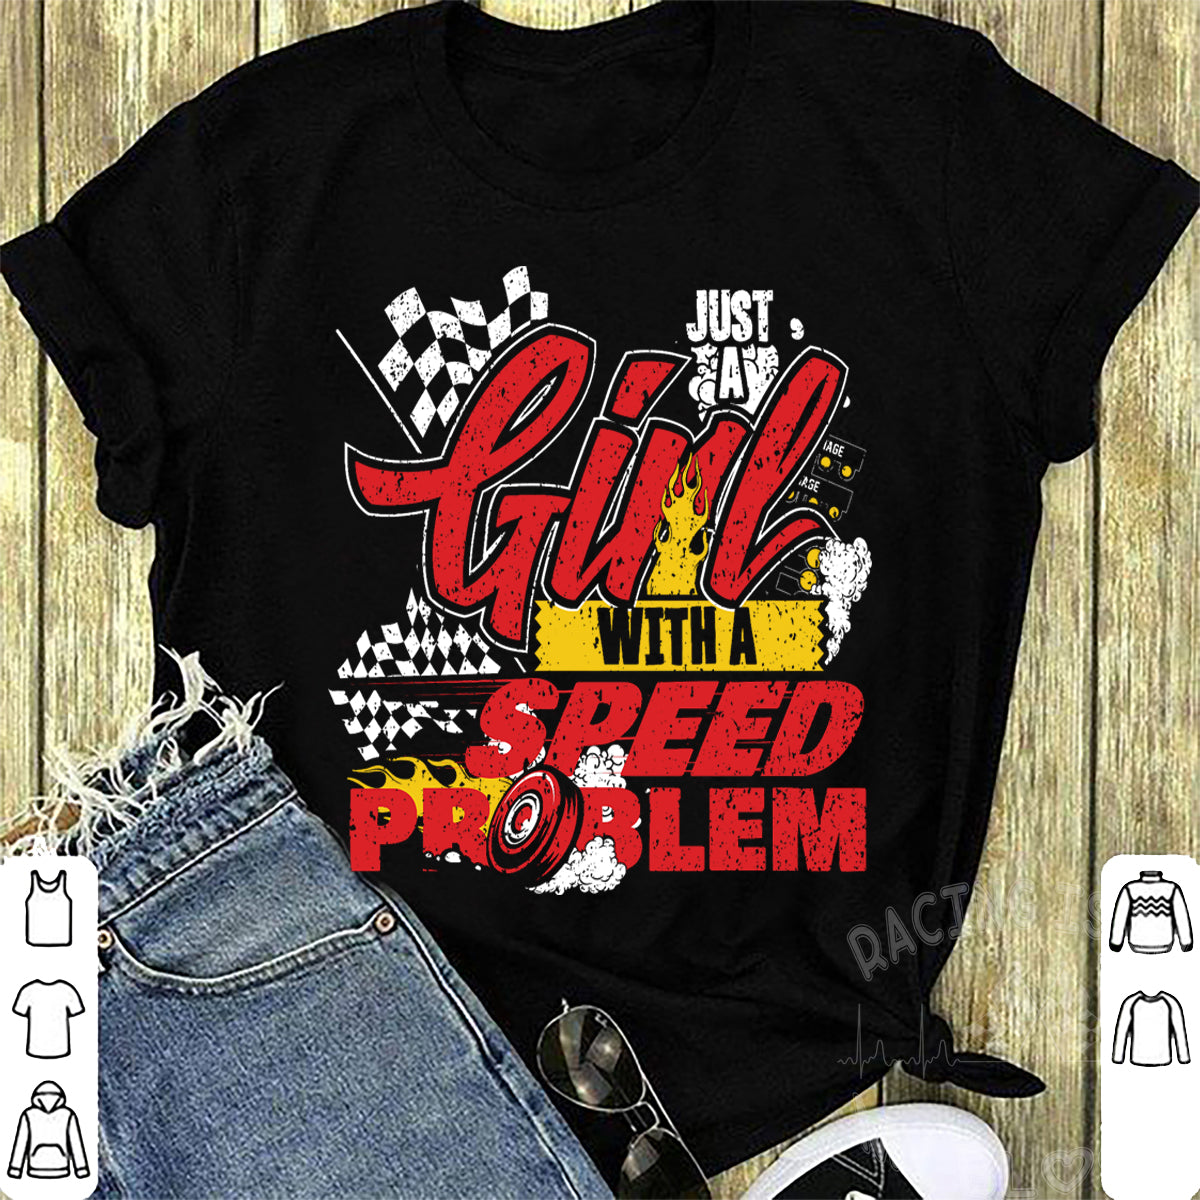 Just A Girl With A Speed Problem T-Shirts!